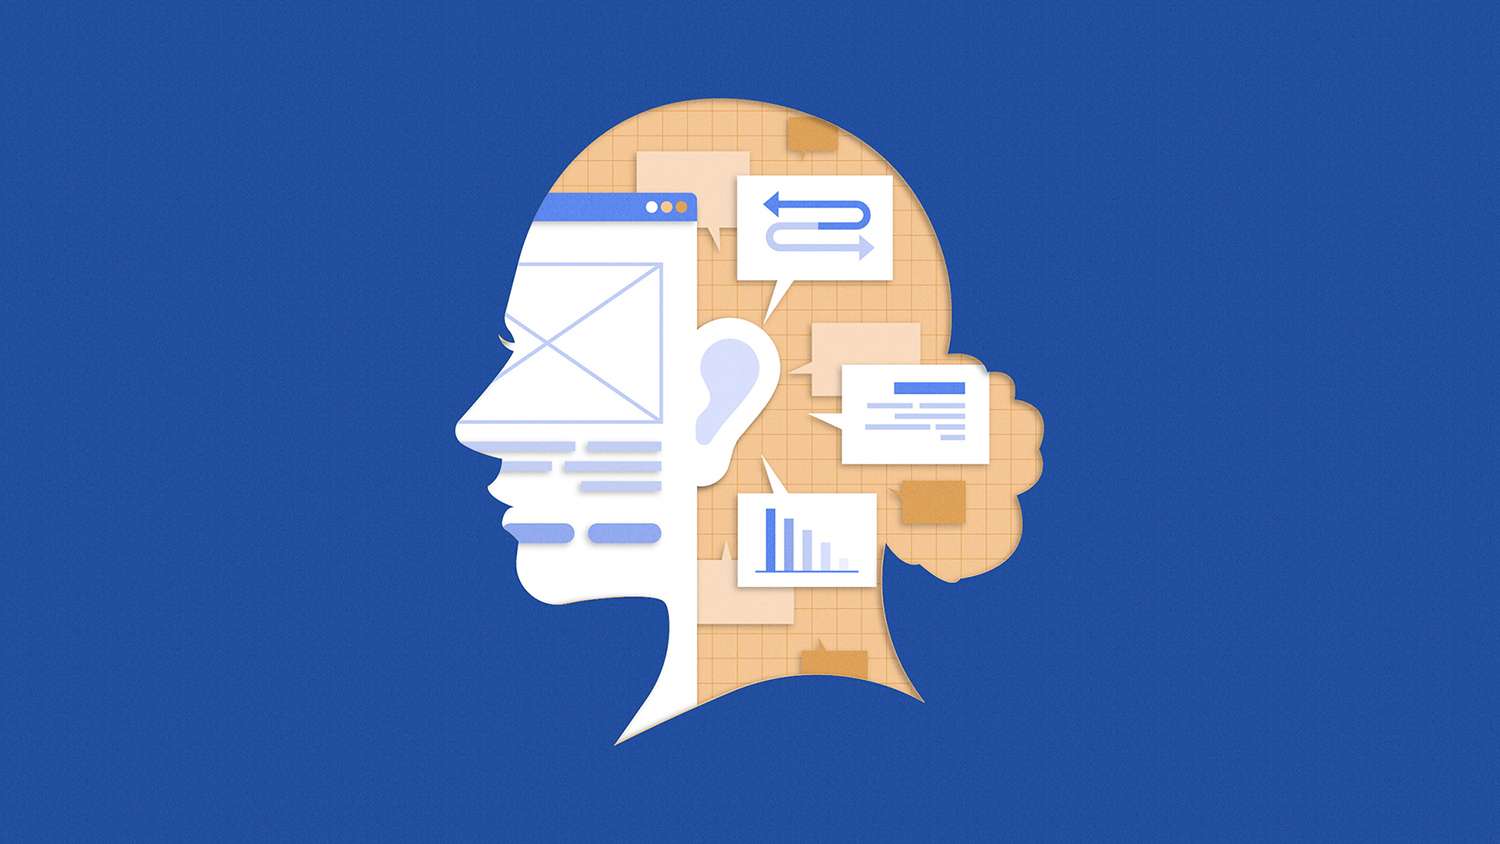 Within the silhouette of a profile head, wireframes and graphs surround a listening ear symbolizing the work done in a UX research career.